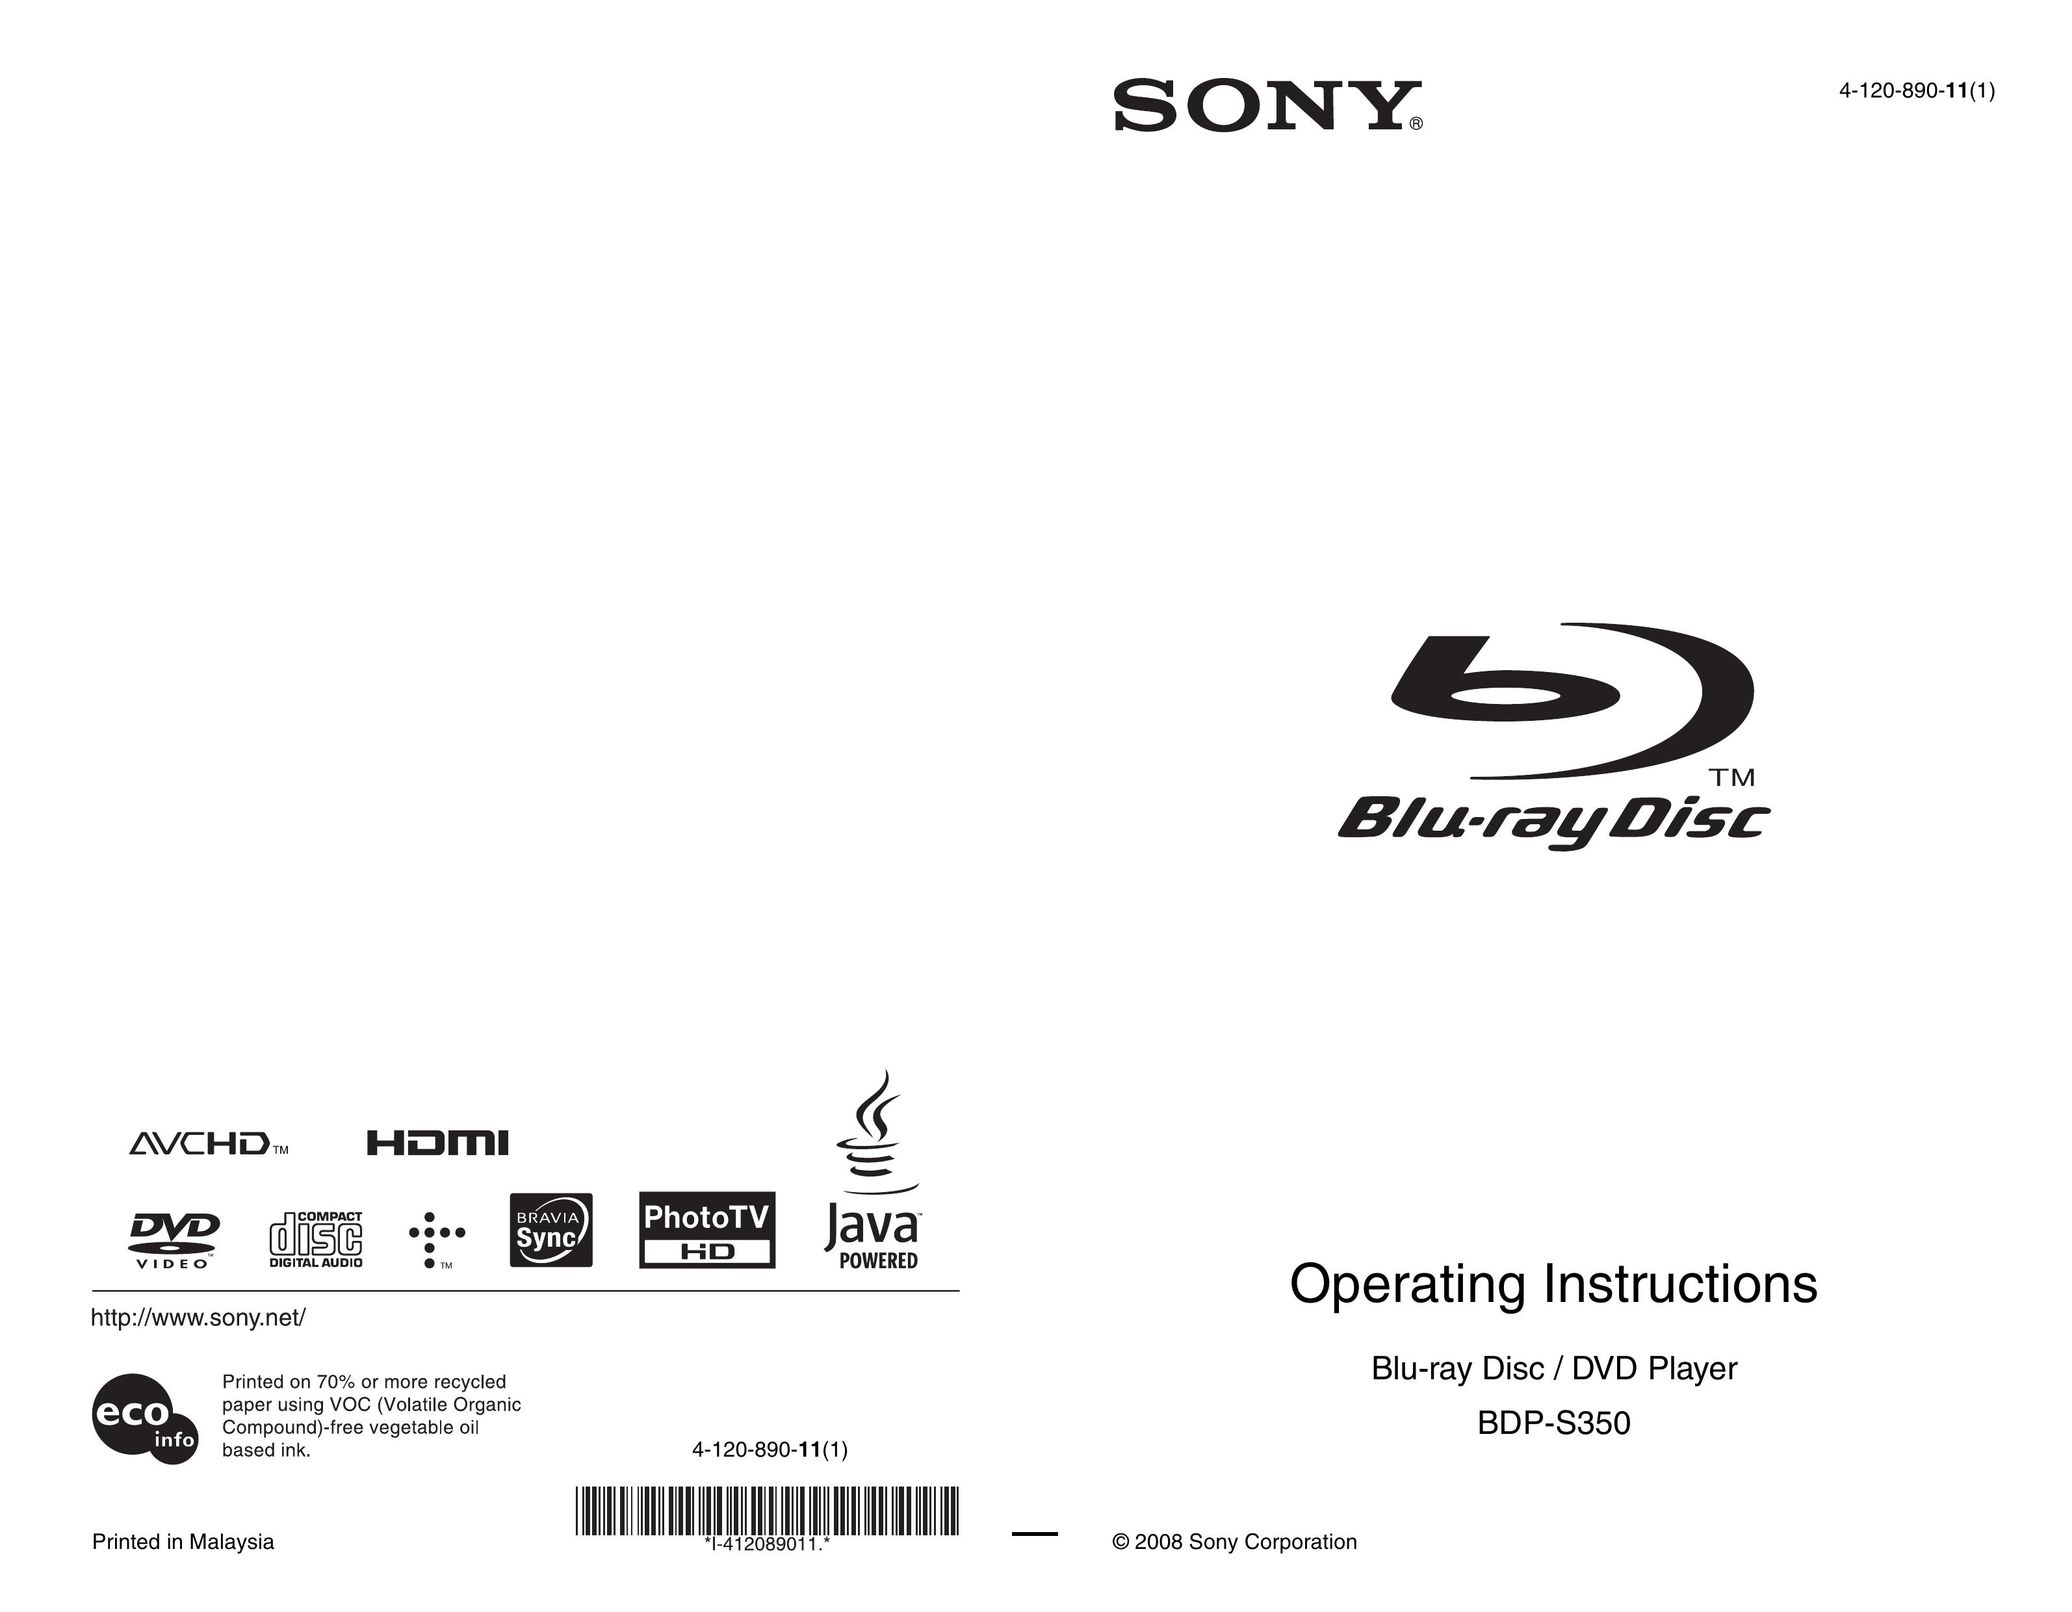 Sony BDP-S350 DVD Player User Manual